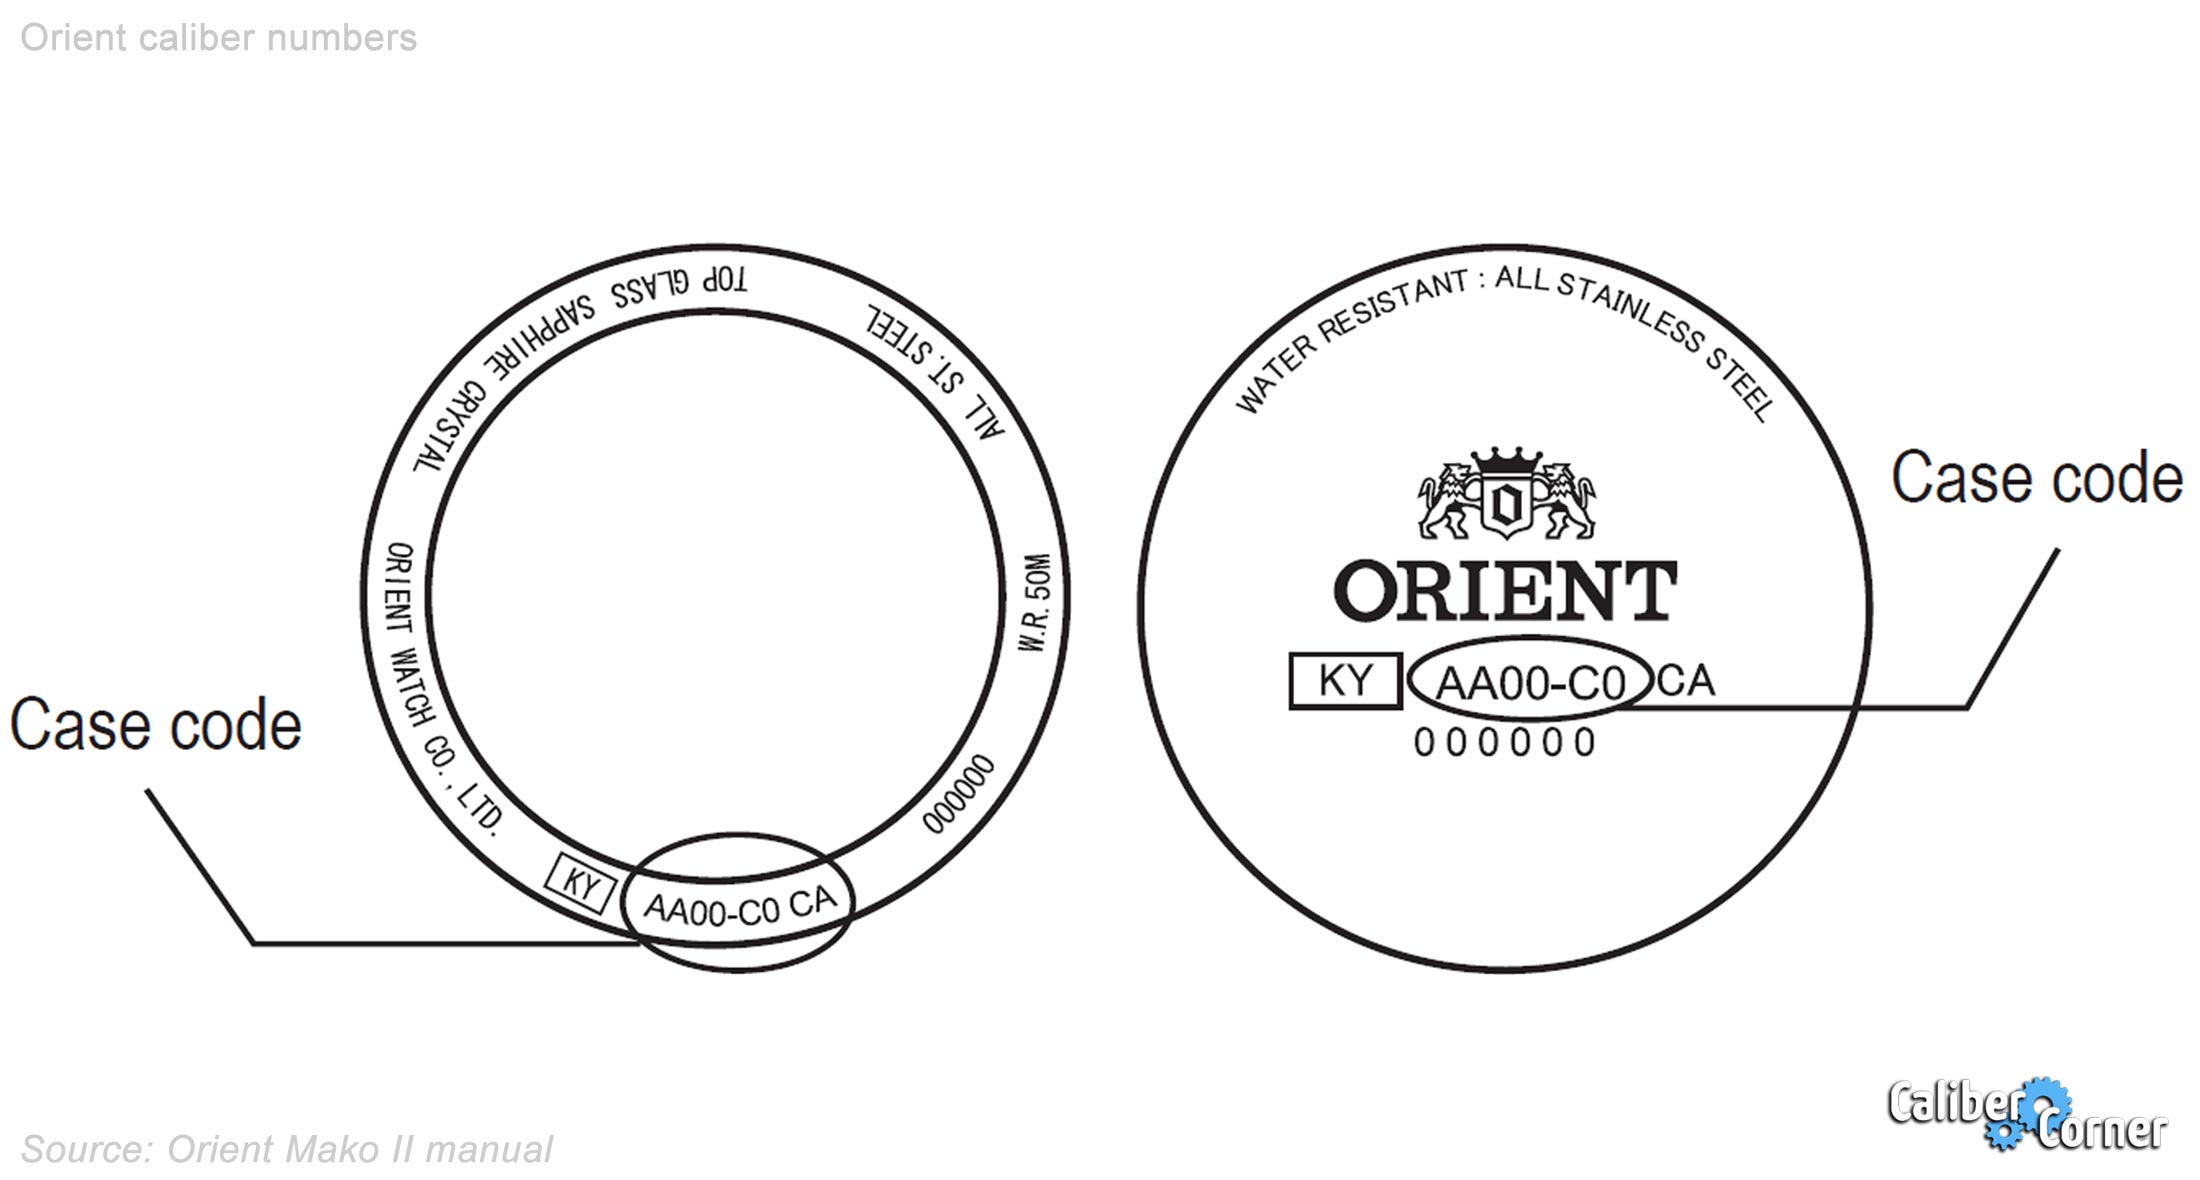 Locating Orient Caliber Numbers